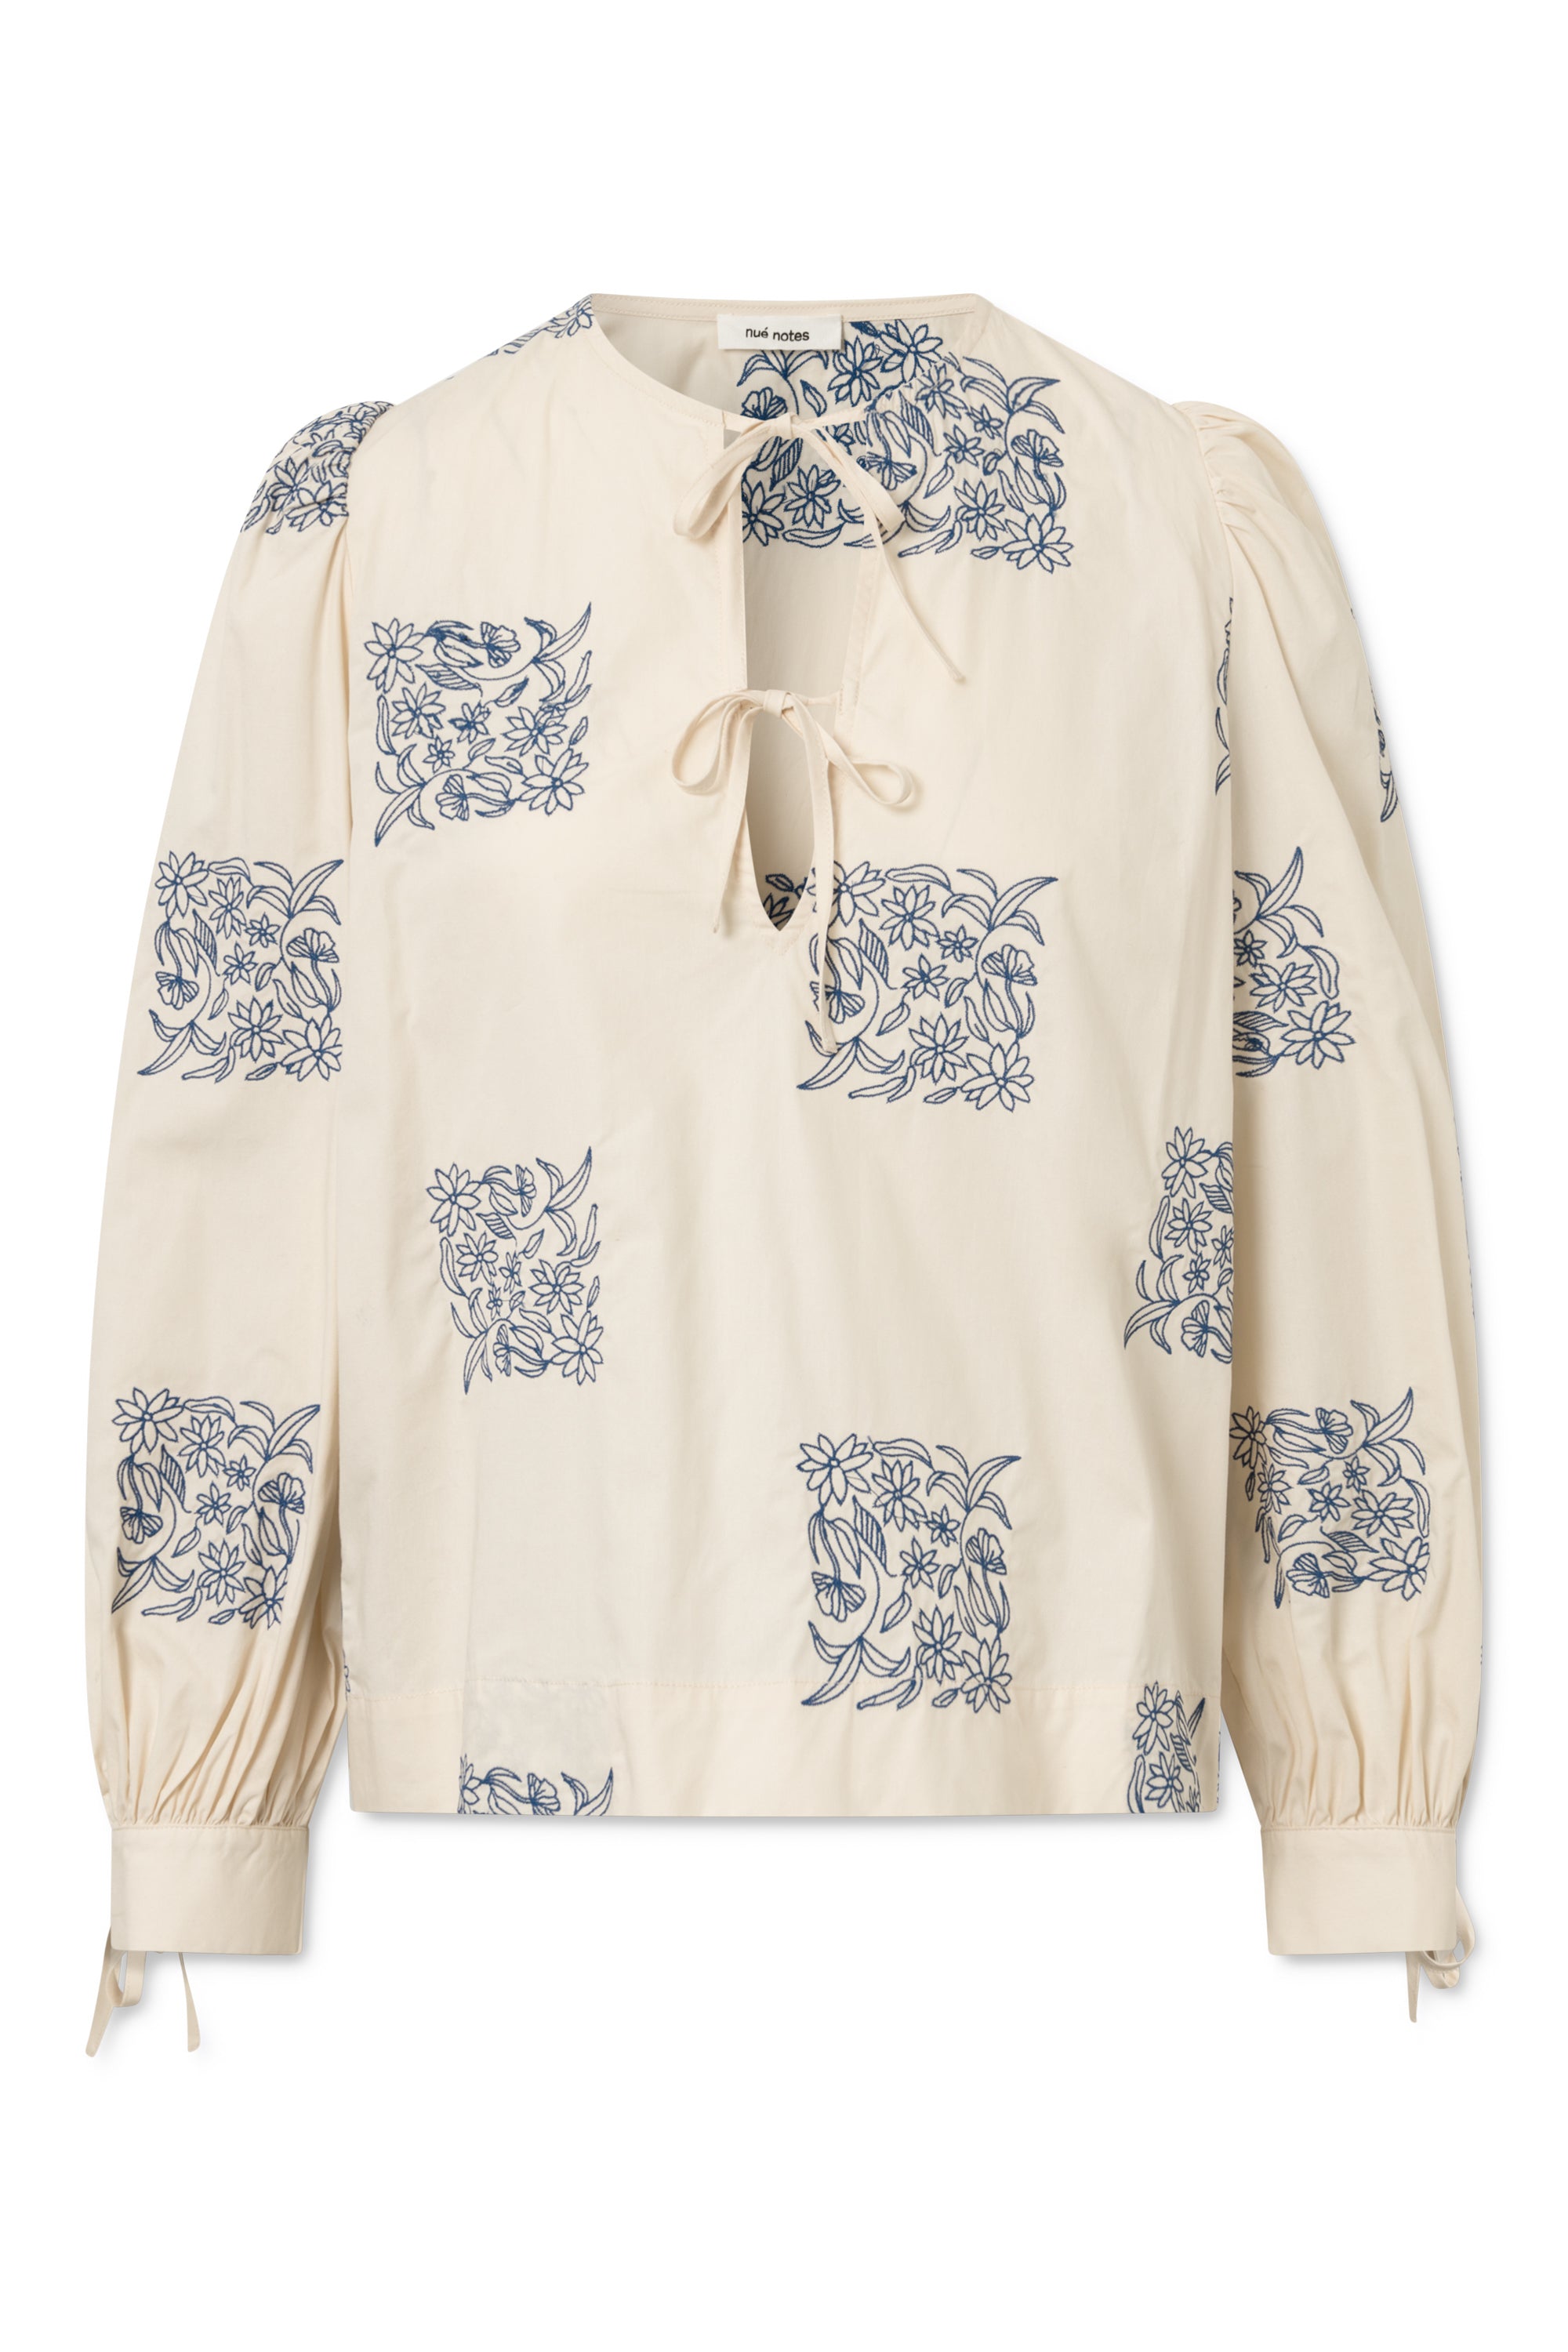 nué notes Hartwell Blouse SHIRTS 013 Birch